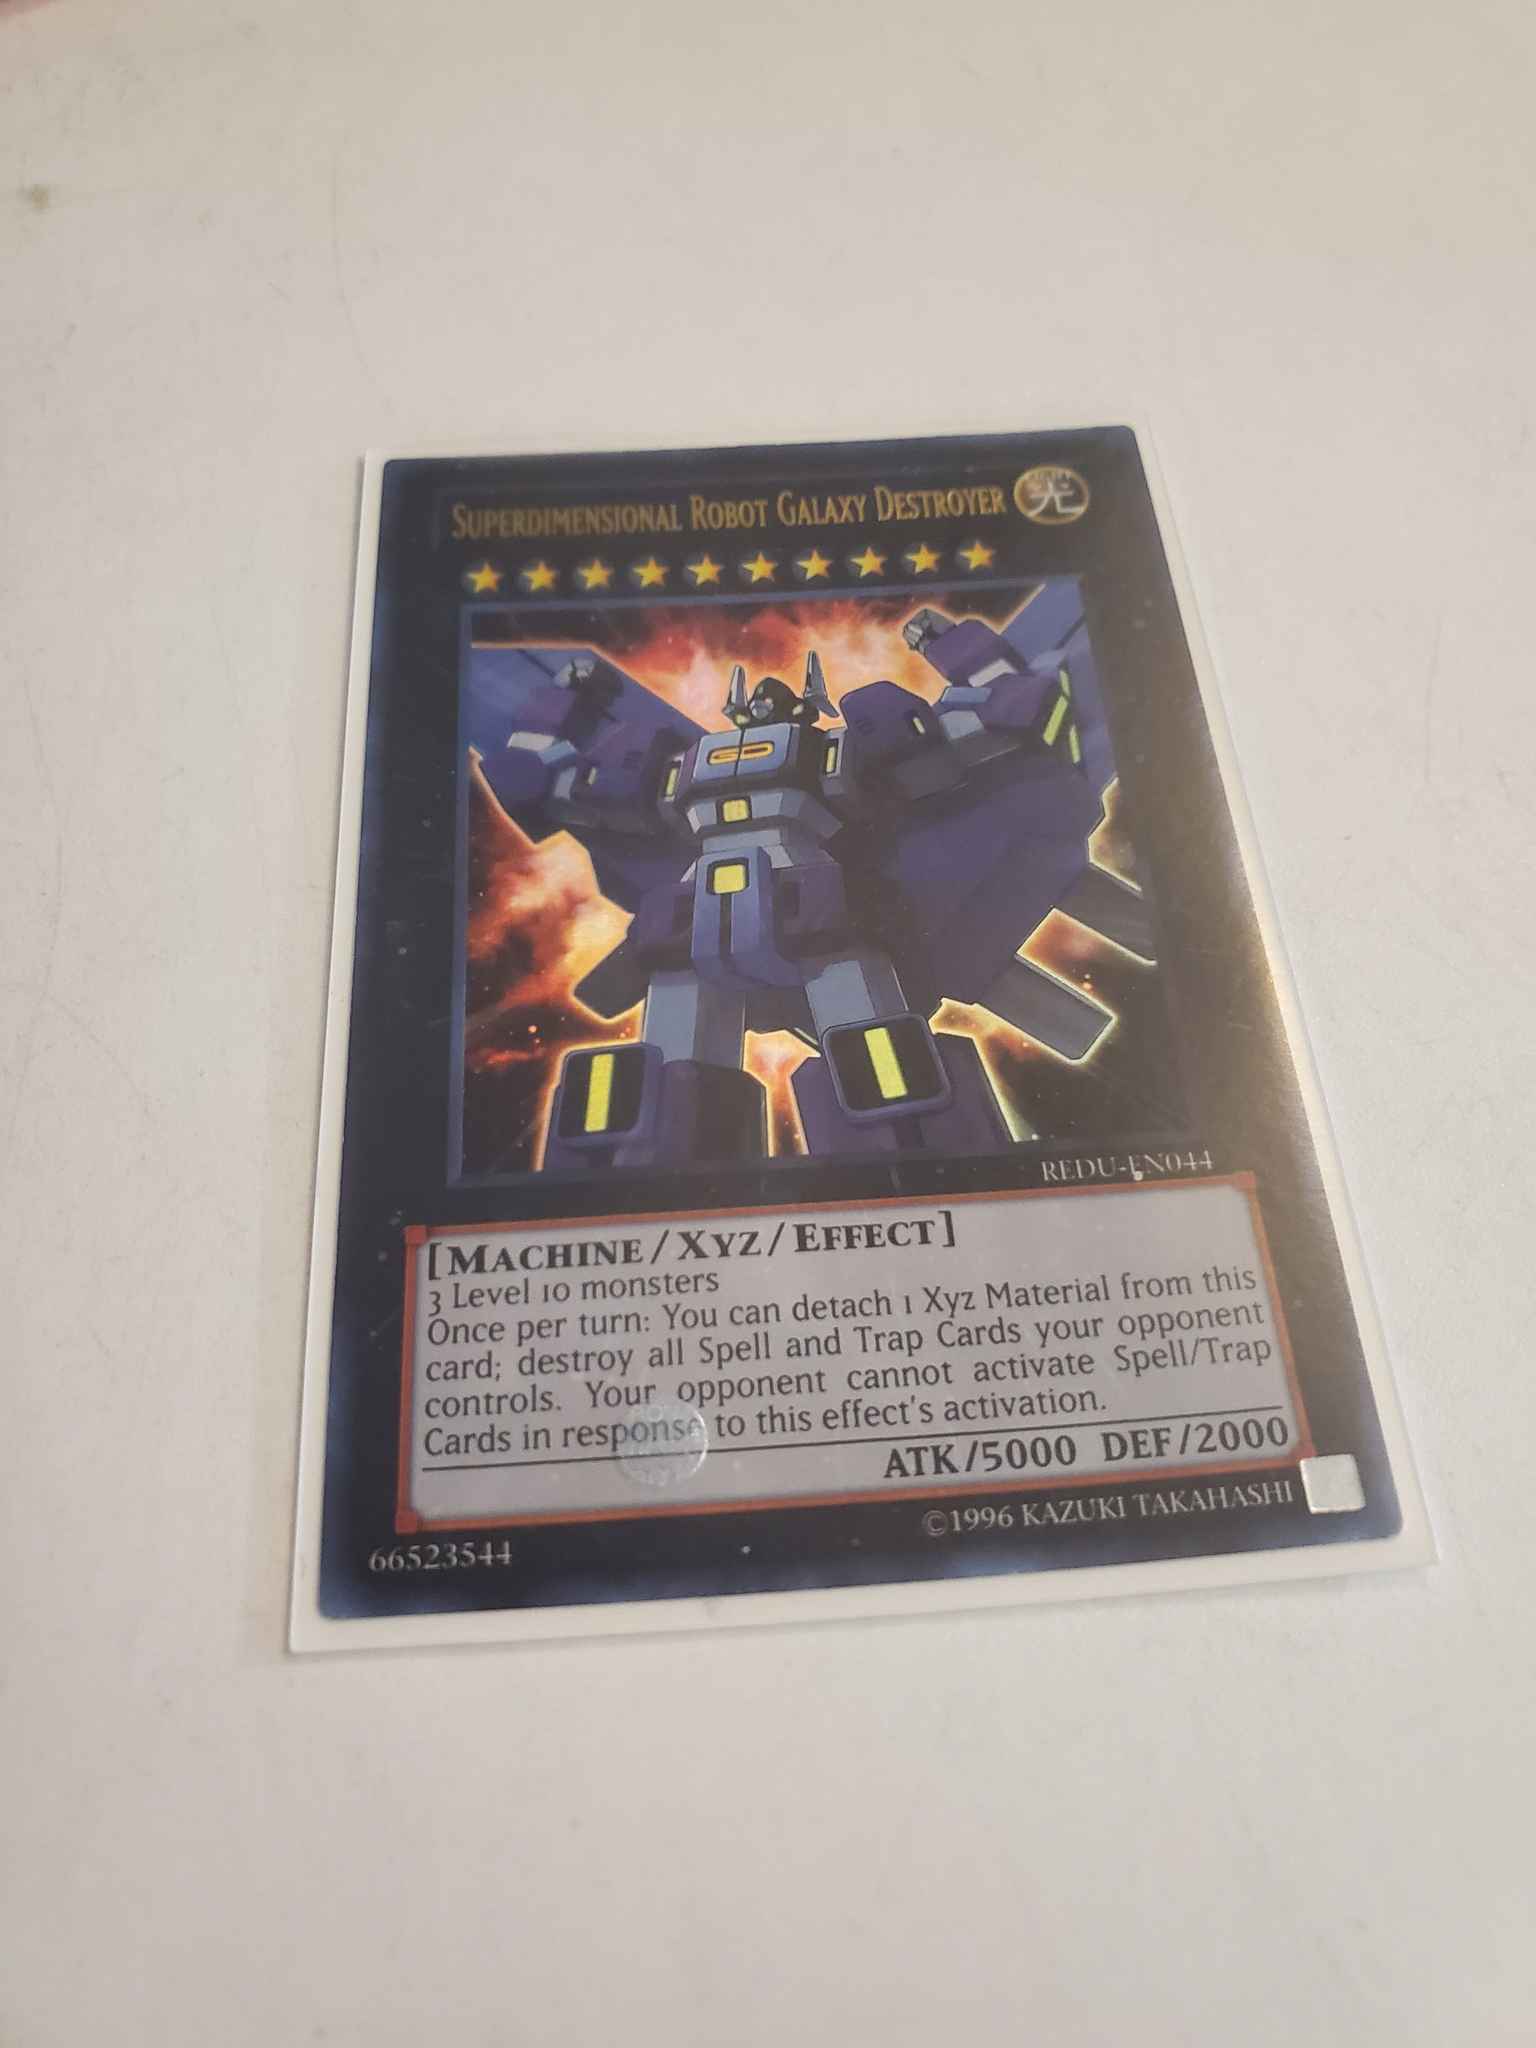 Superdimensional Robot Galaxy Destroyer Superdimensional Robot Galaxy Destroyer Return Of The Duelist Yugioh Online Gaming Store For Cards Miniatures Singles Packs Booster Boxes